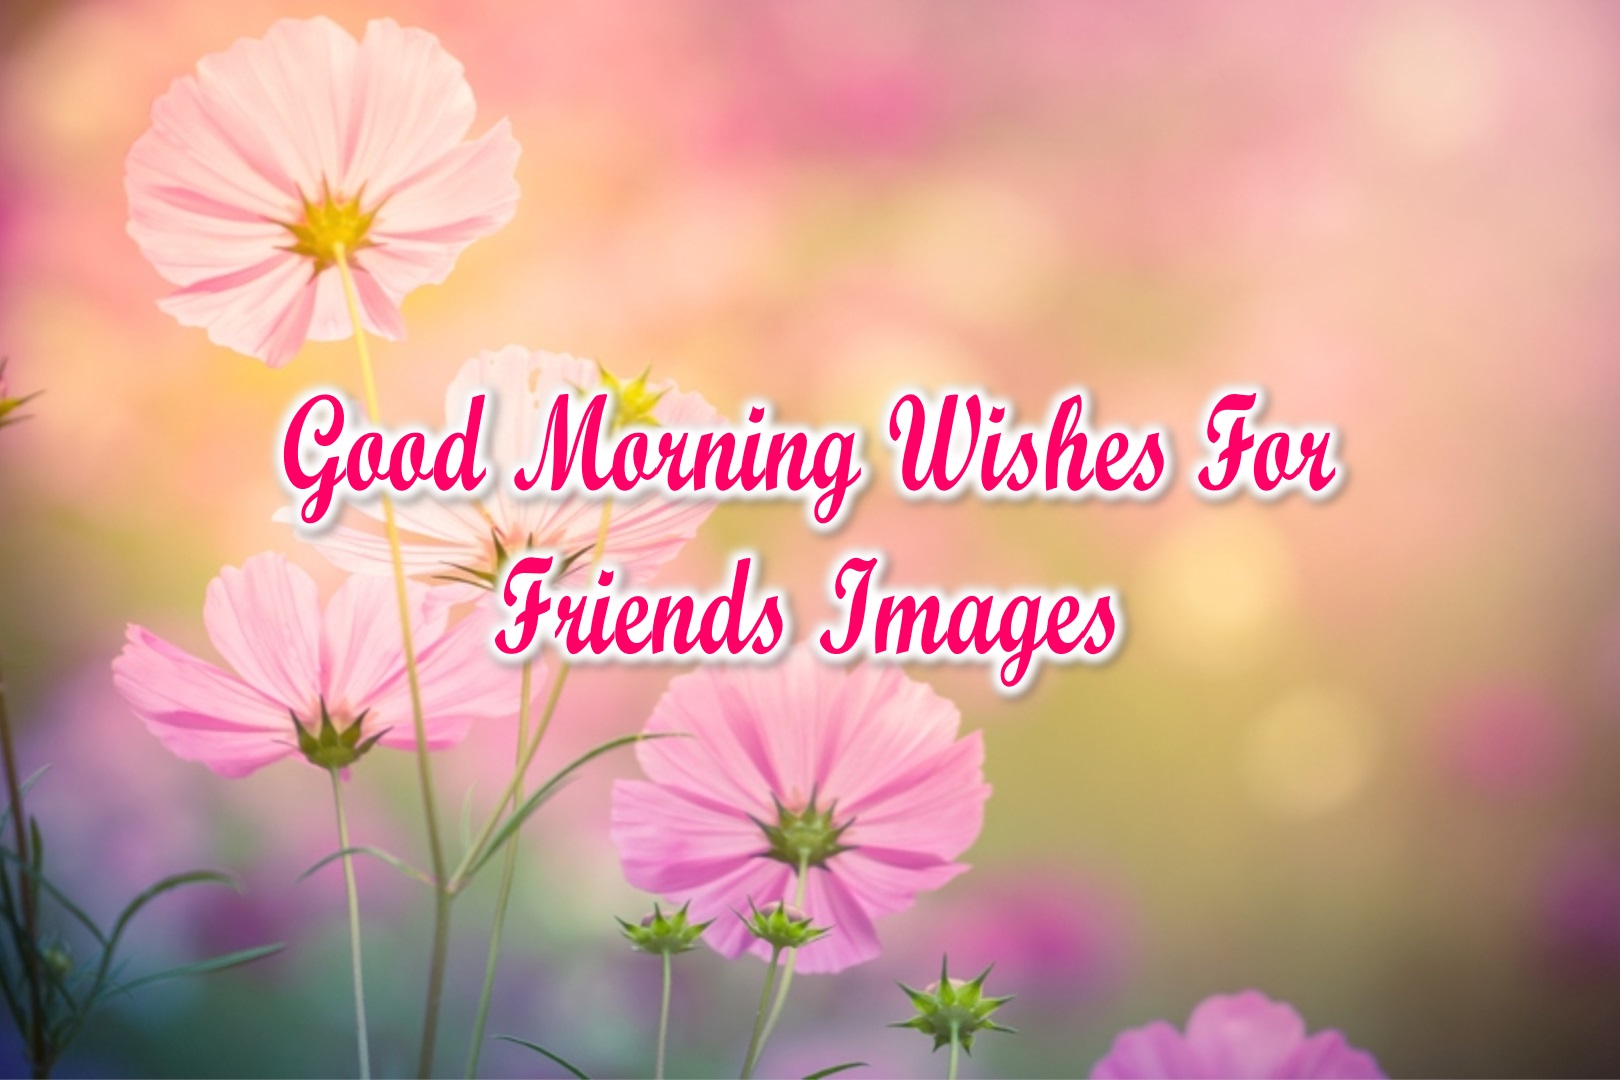 Beautiful Good Morning Wishes For Friends Images | SuperbWishes